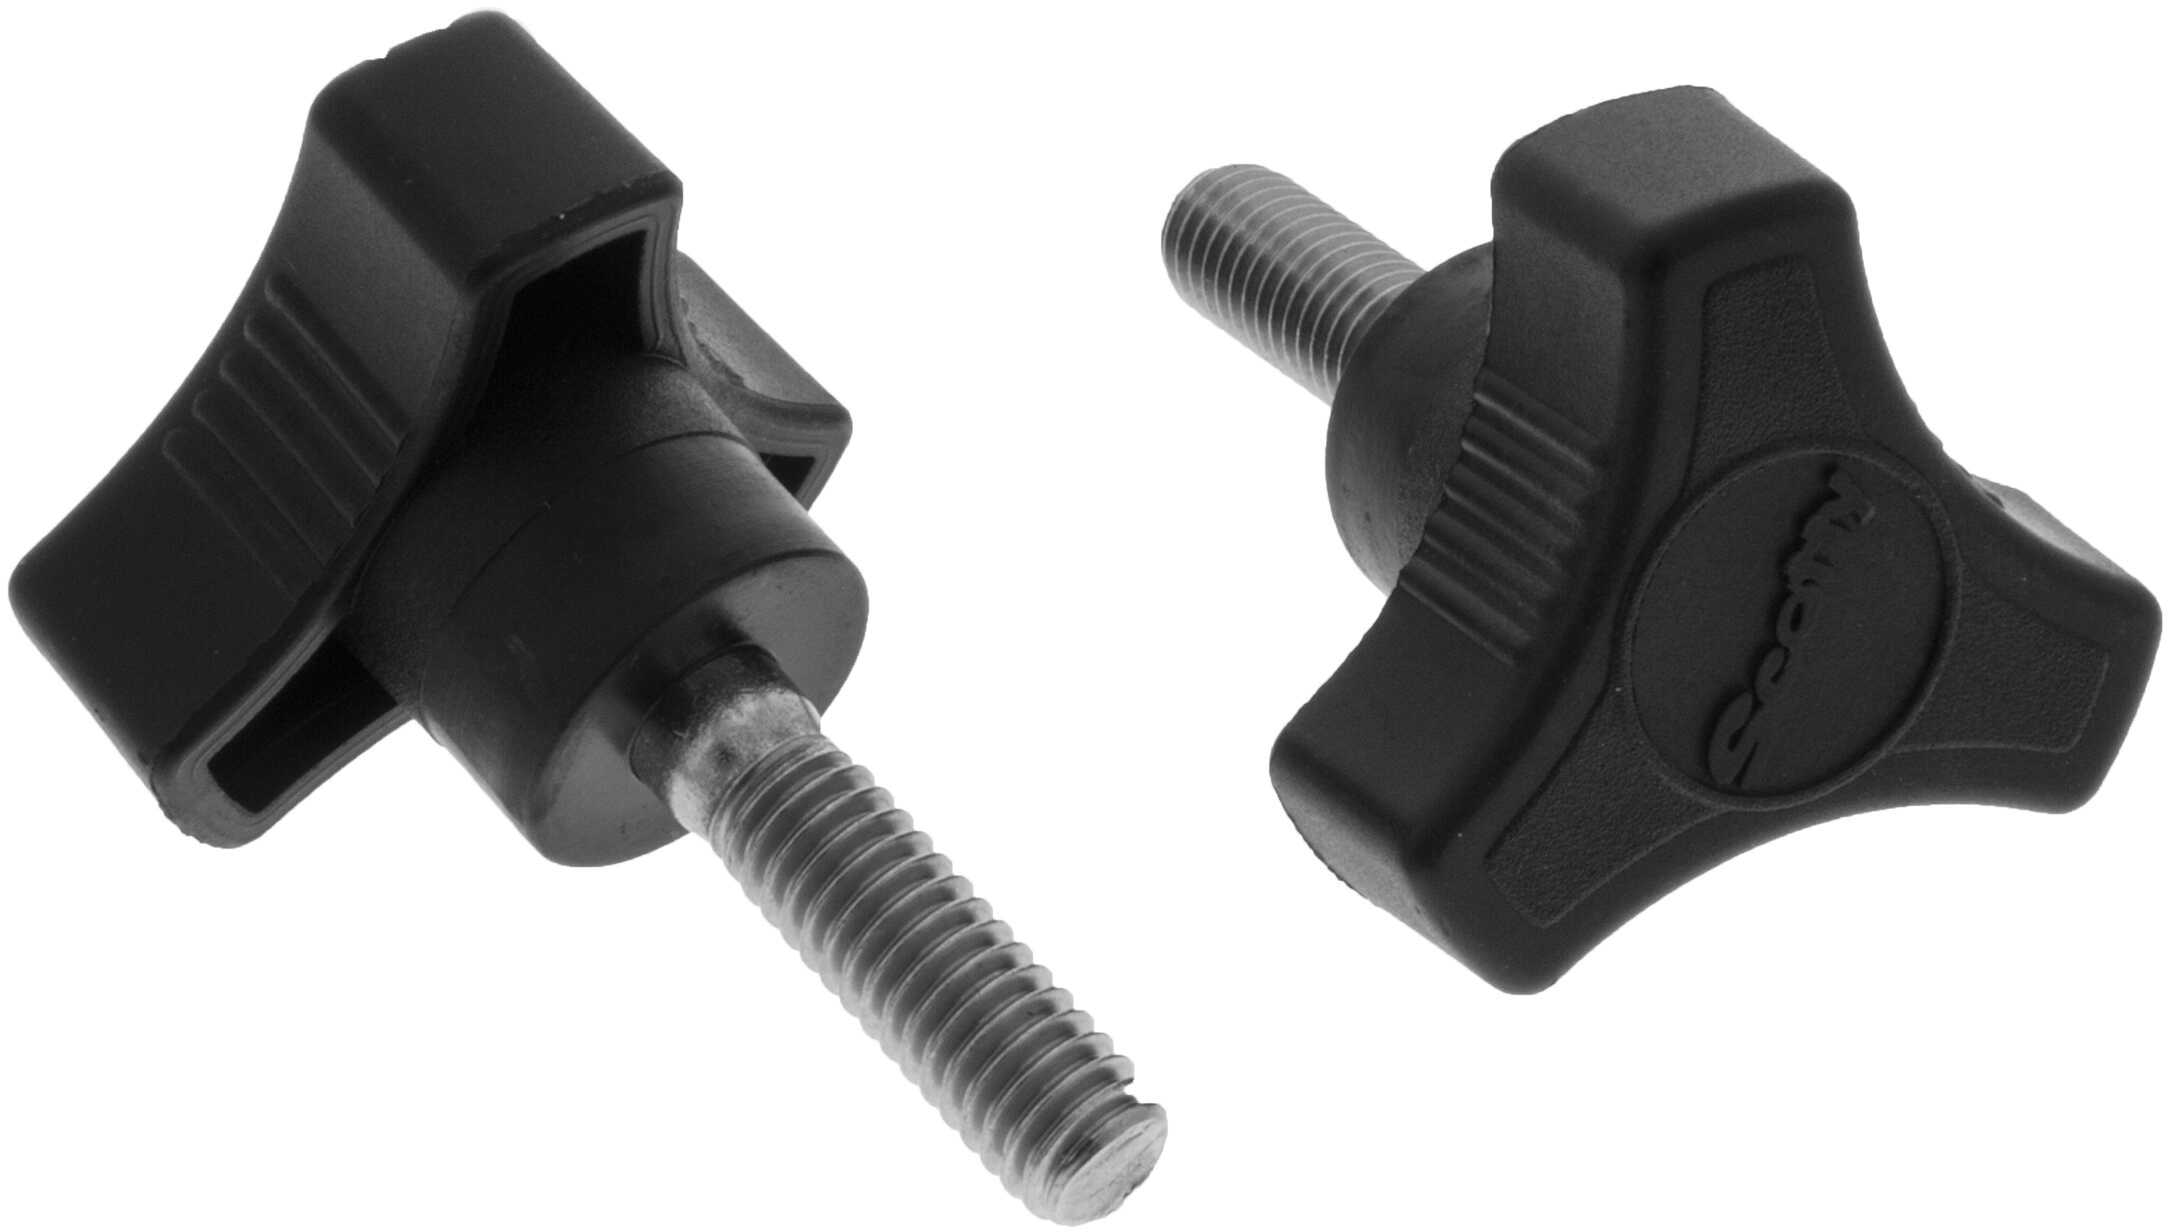 Scotty Replacement Mounting Bolts1026 Swivel 2 Per Pack